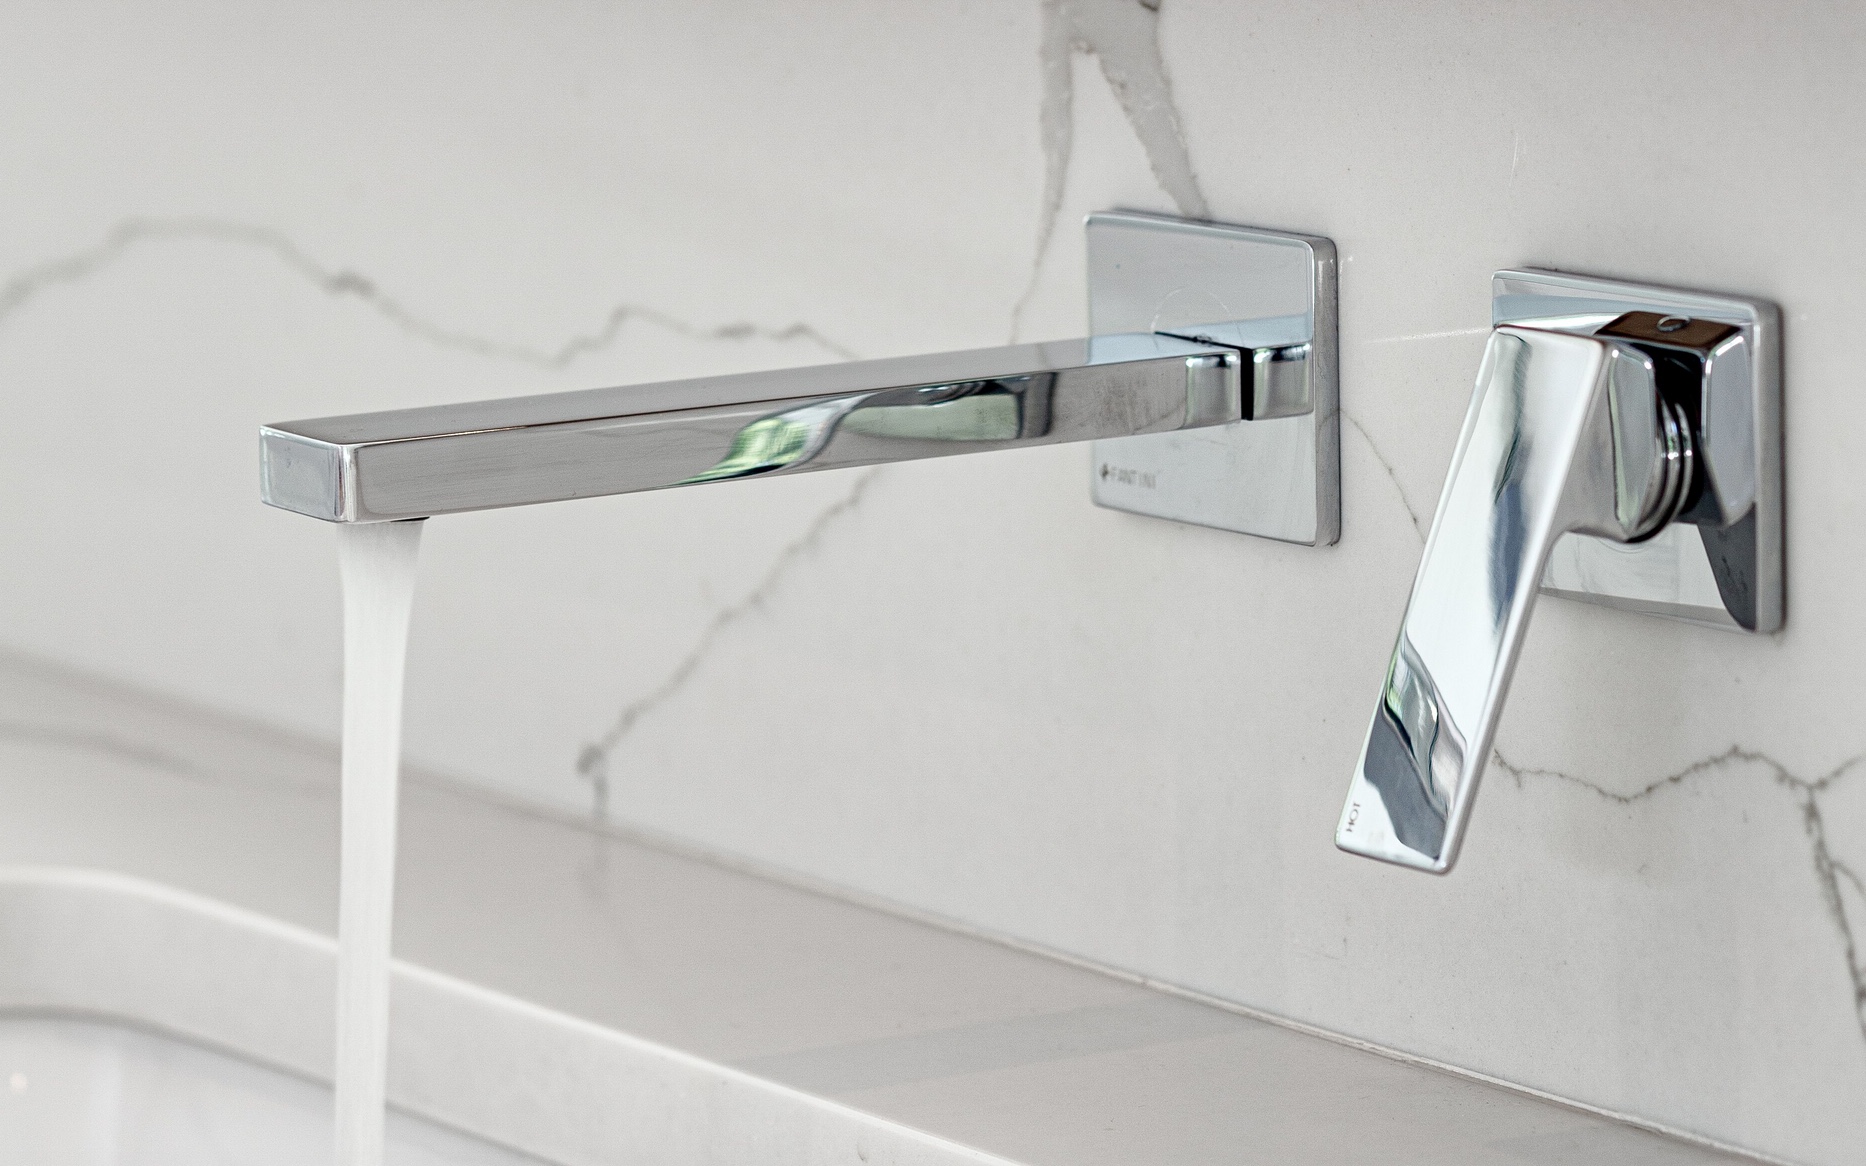 A Fantini Faucet Refreshes